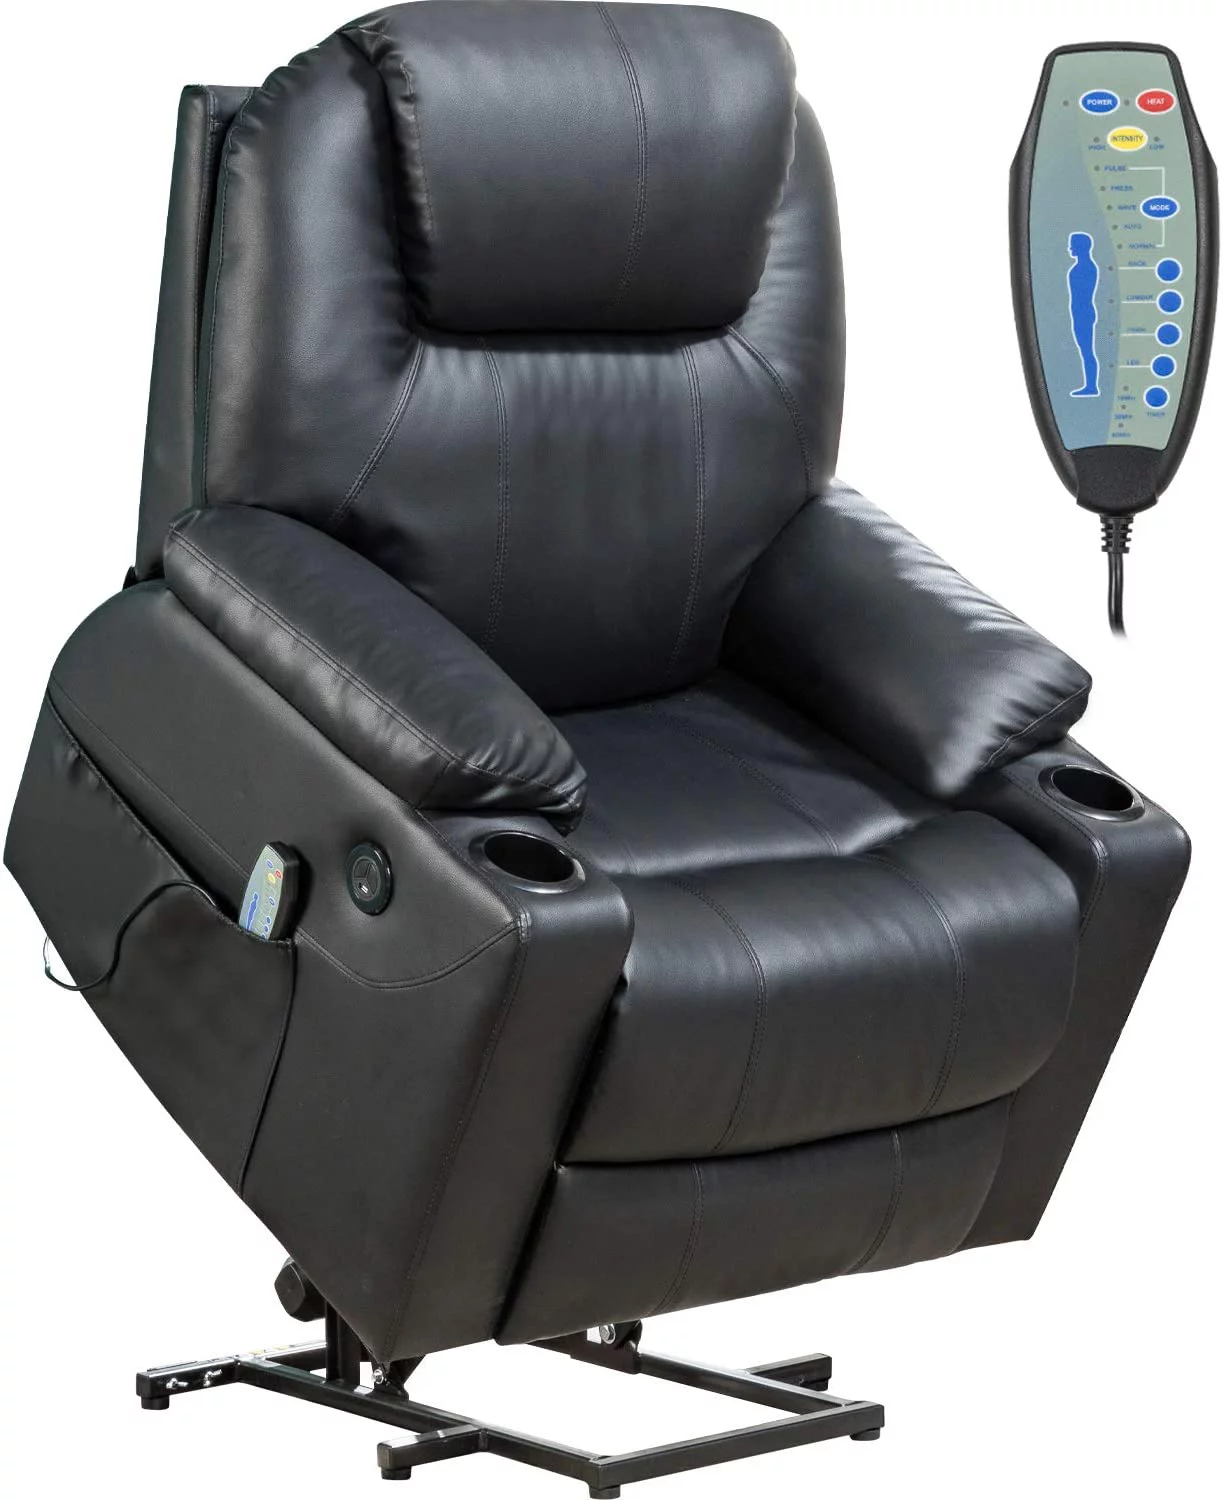 Electric-powered wall recliner. 